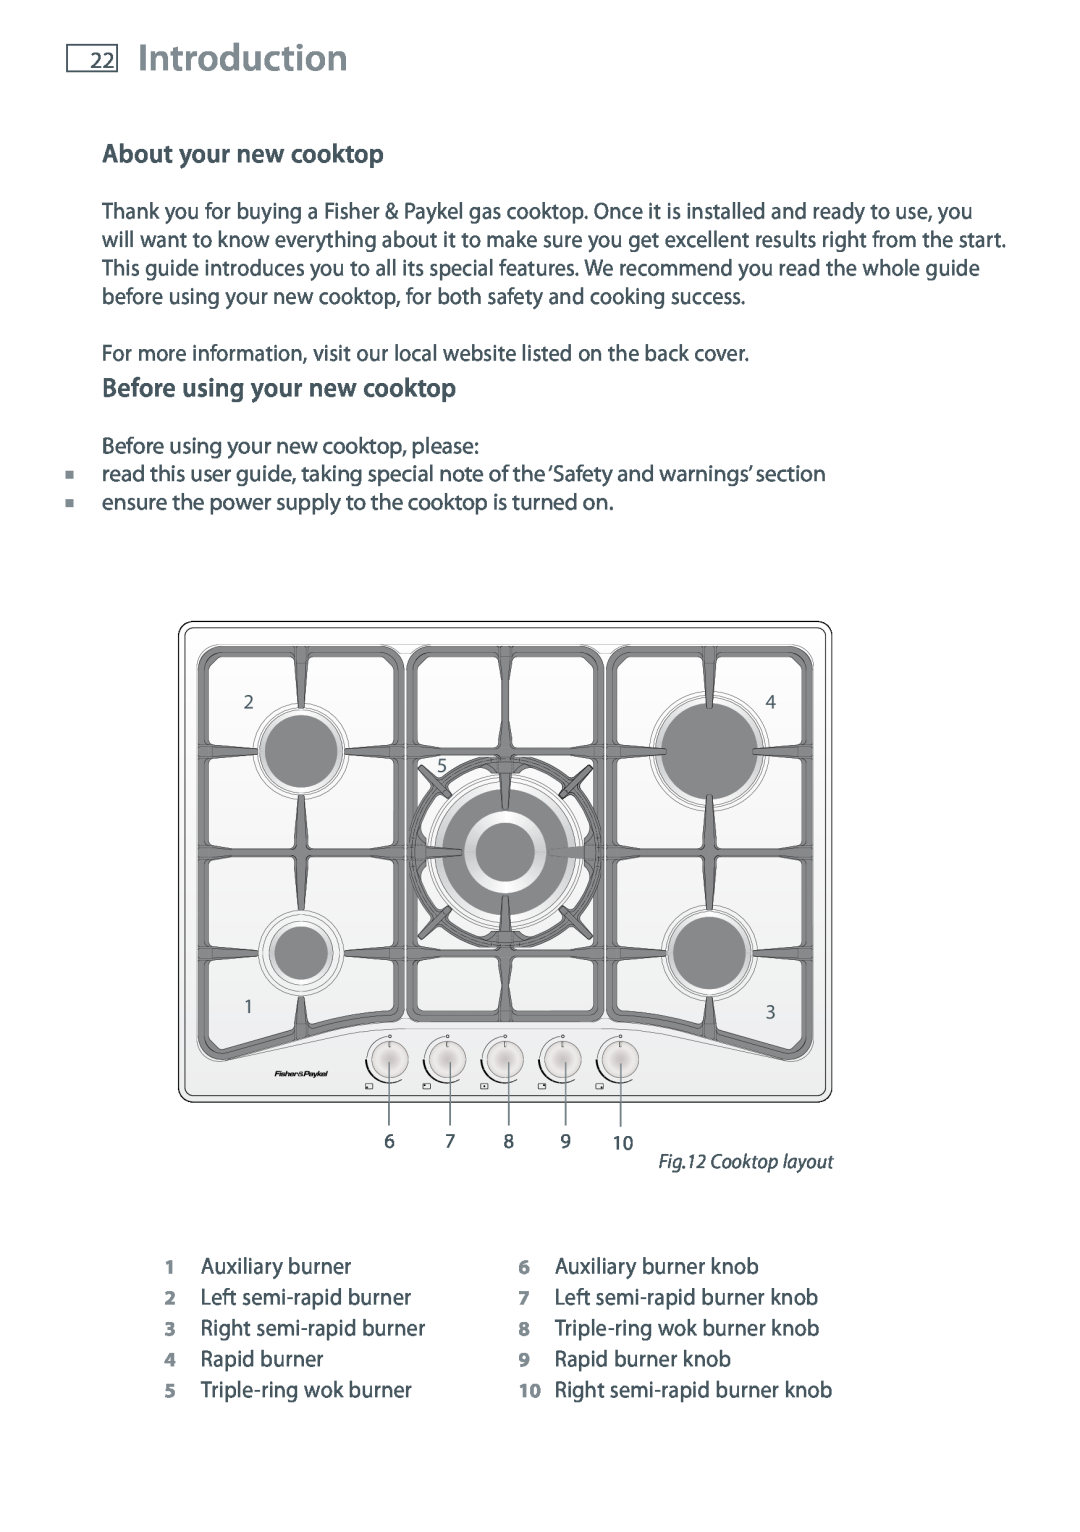 Fisher & Paykel CG705 installation instructions Introduction, About your new cooktop, Before using your new cooktop 